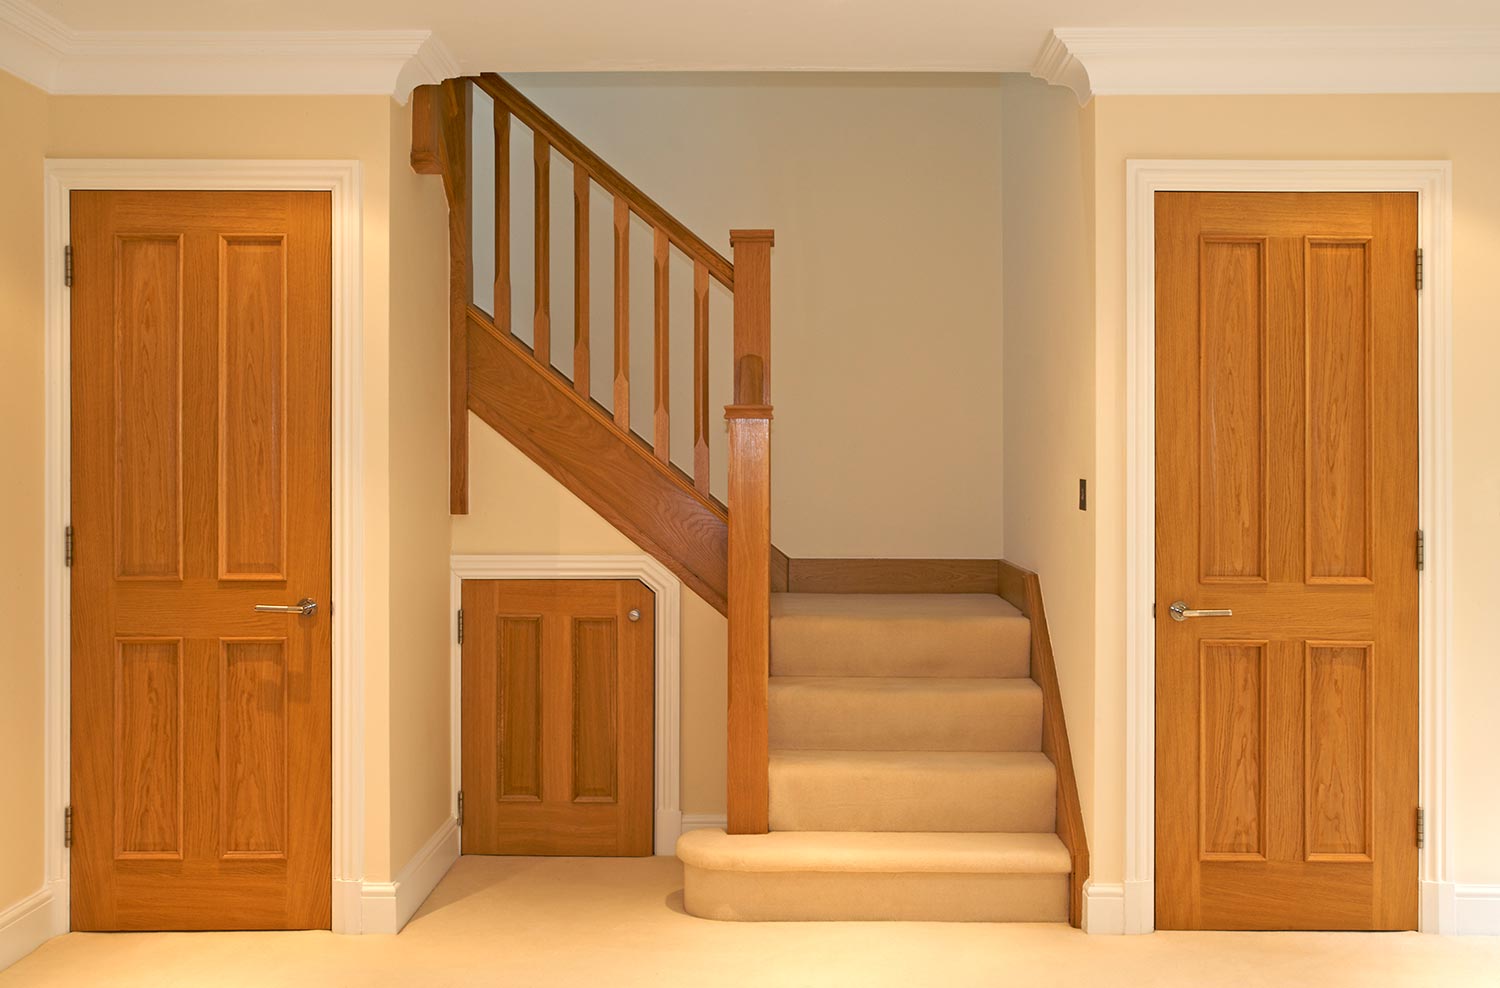 Beautifully designed and finished oak staircase and doors in a luxury new home